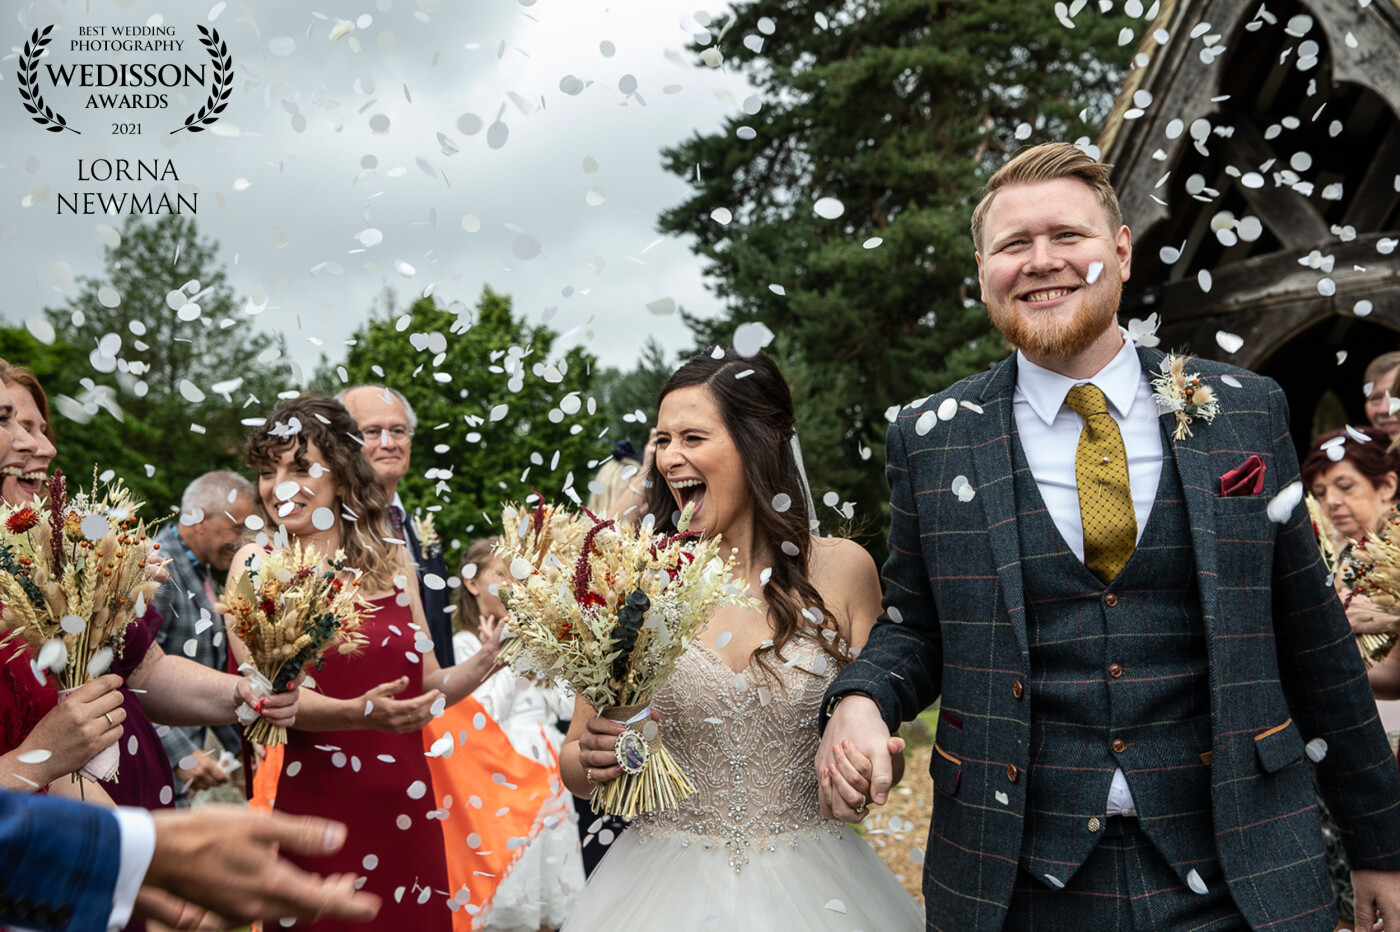 I think this is one of my favourite confetti shots ever. It is from lovely Cara & Jack's beautiful June wedding day in Surrey, England.